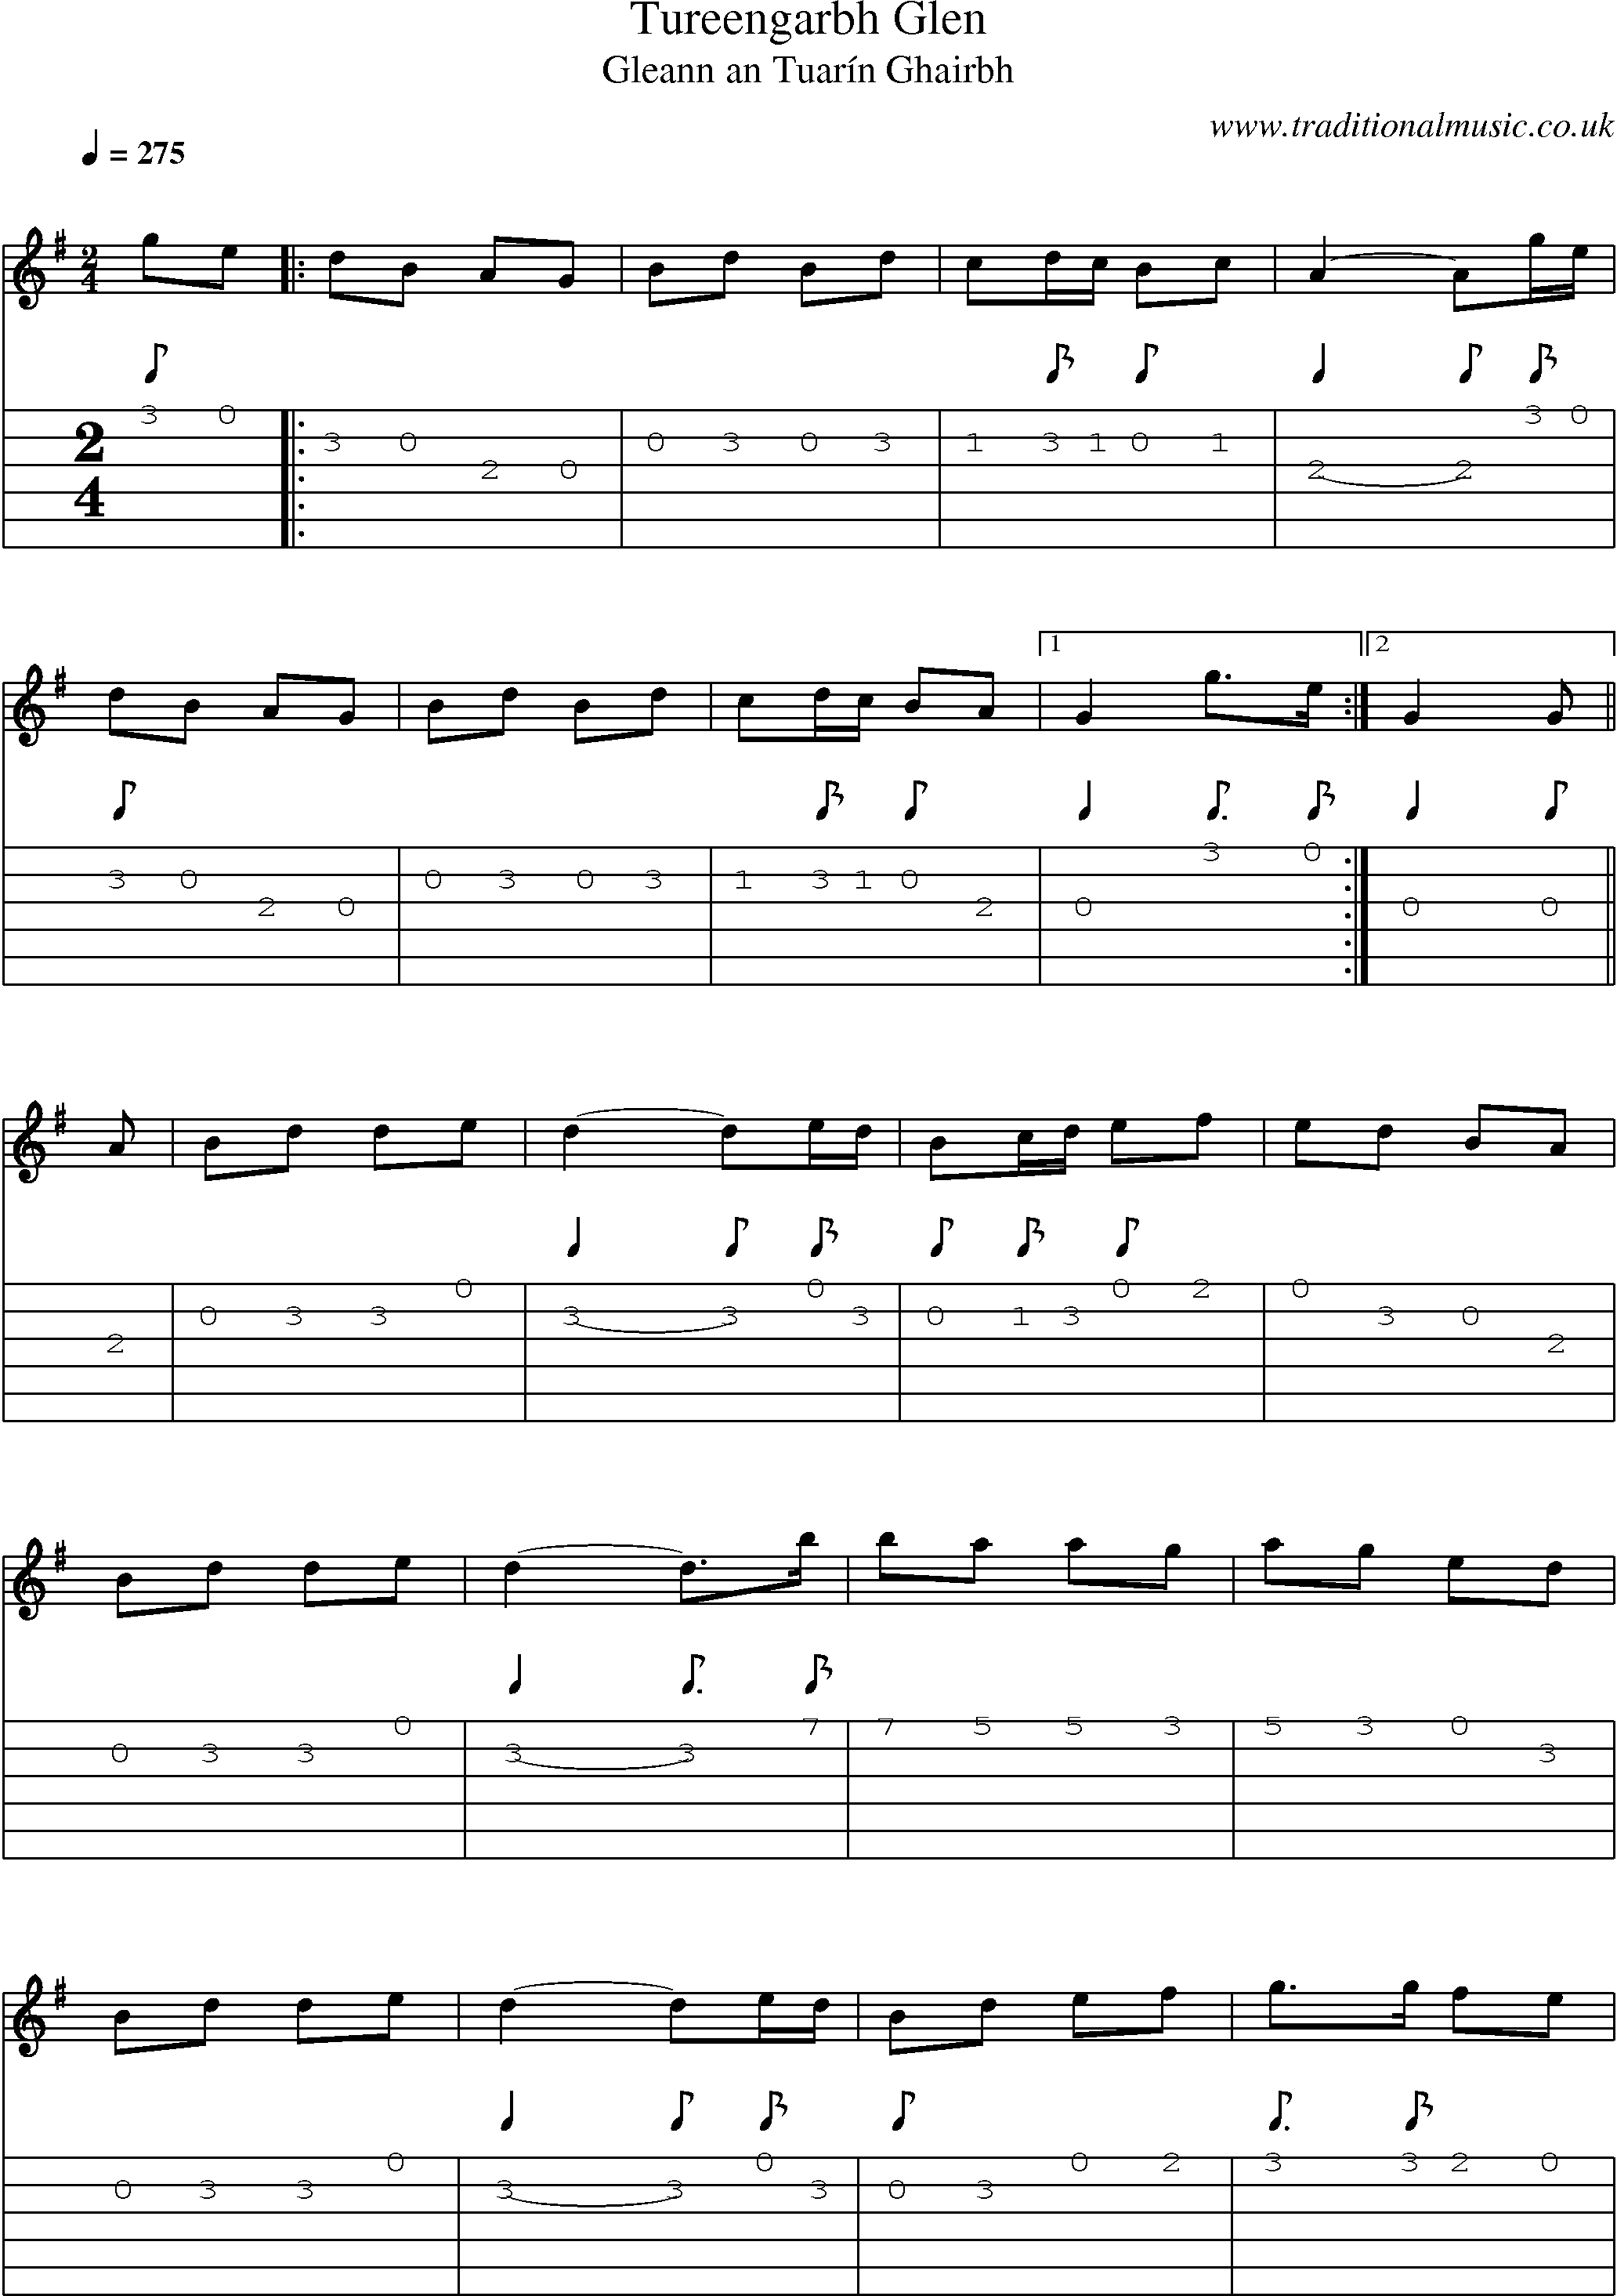 Music Score and Guitar Tabs for Tureengarbh Glen